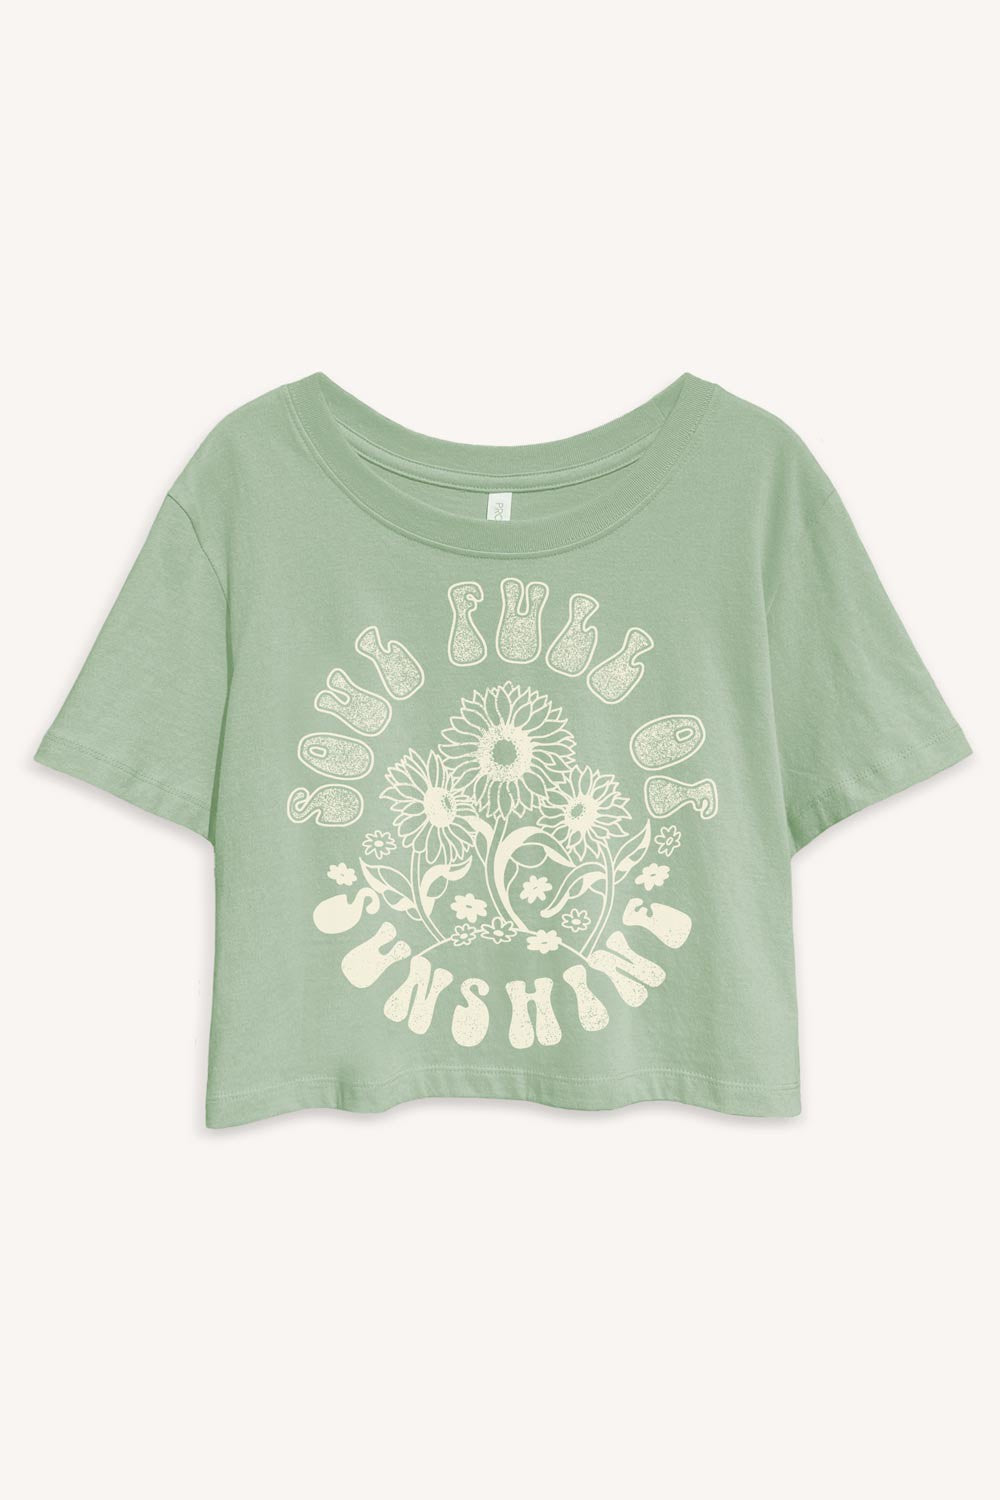 The Soul Full of Sunshine Graphic Tee